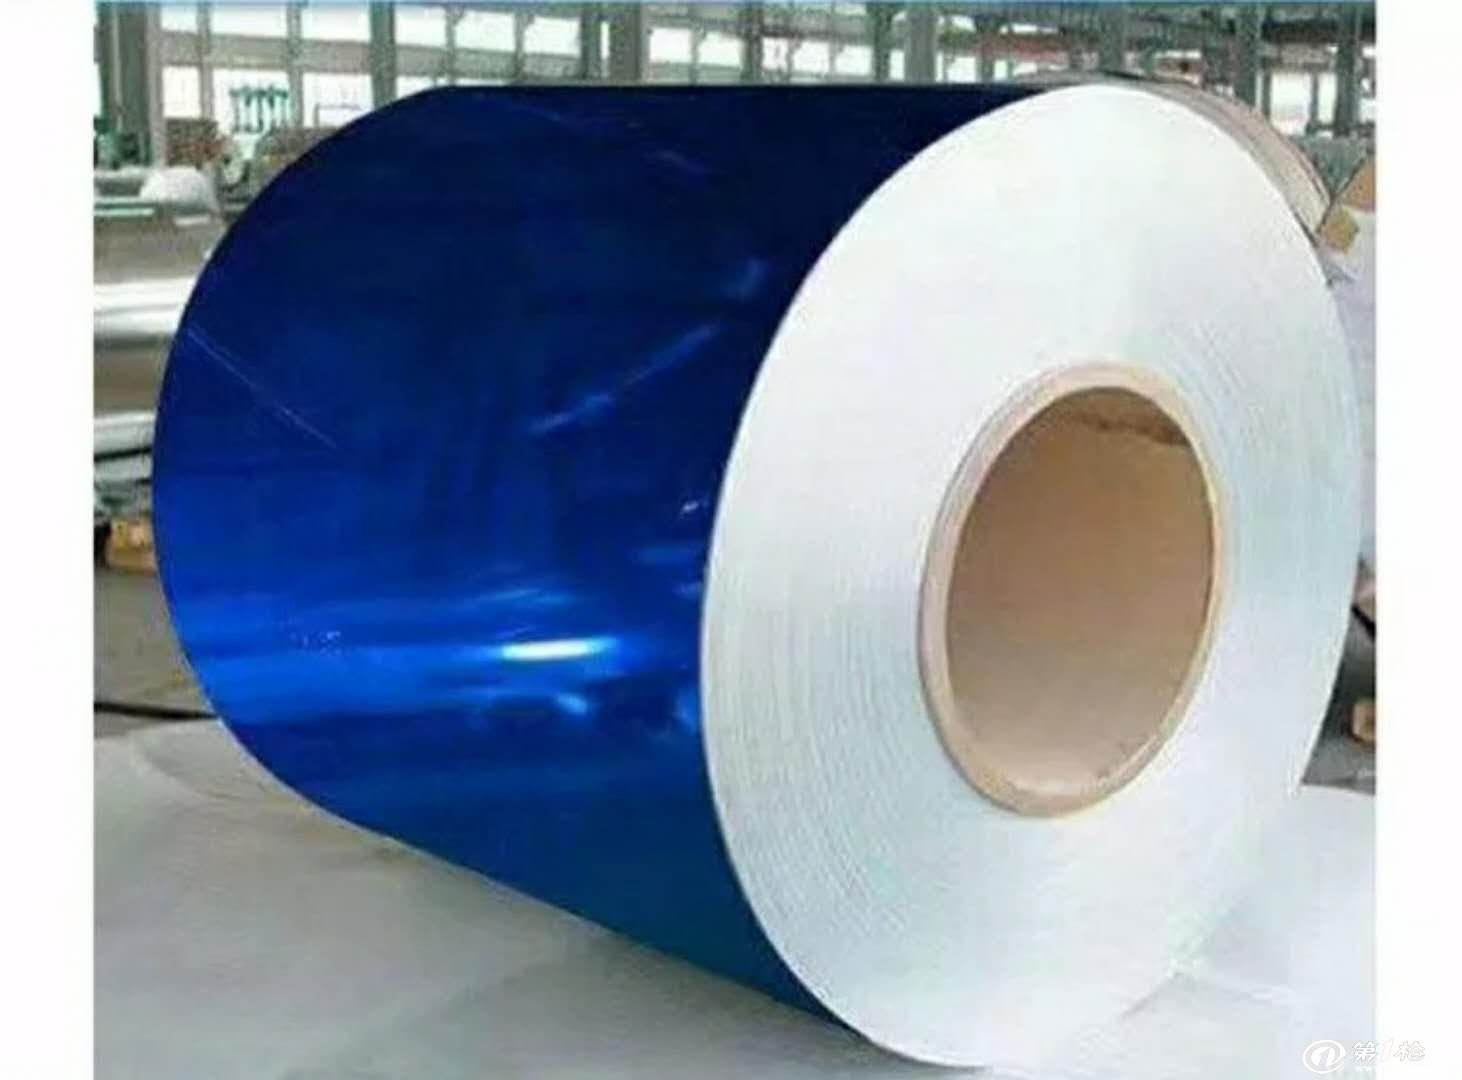 How to Ensure Quality of Prepainted Aluminum Coil